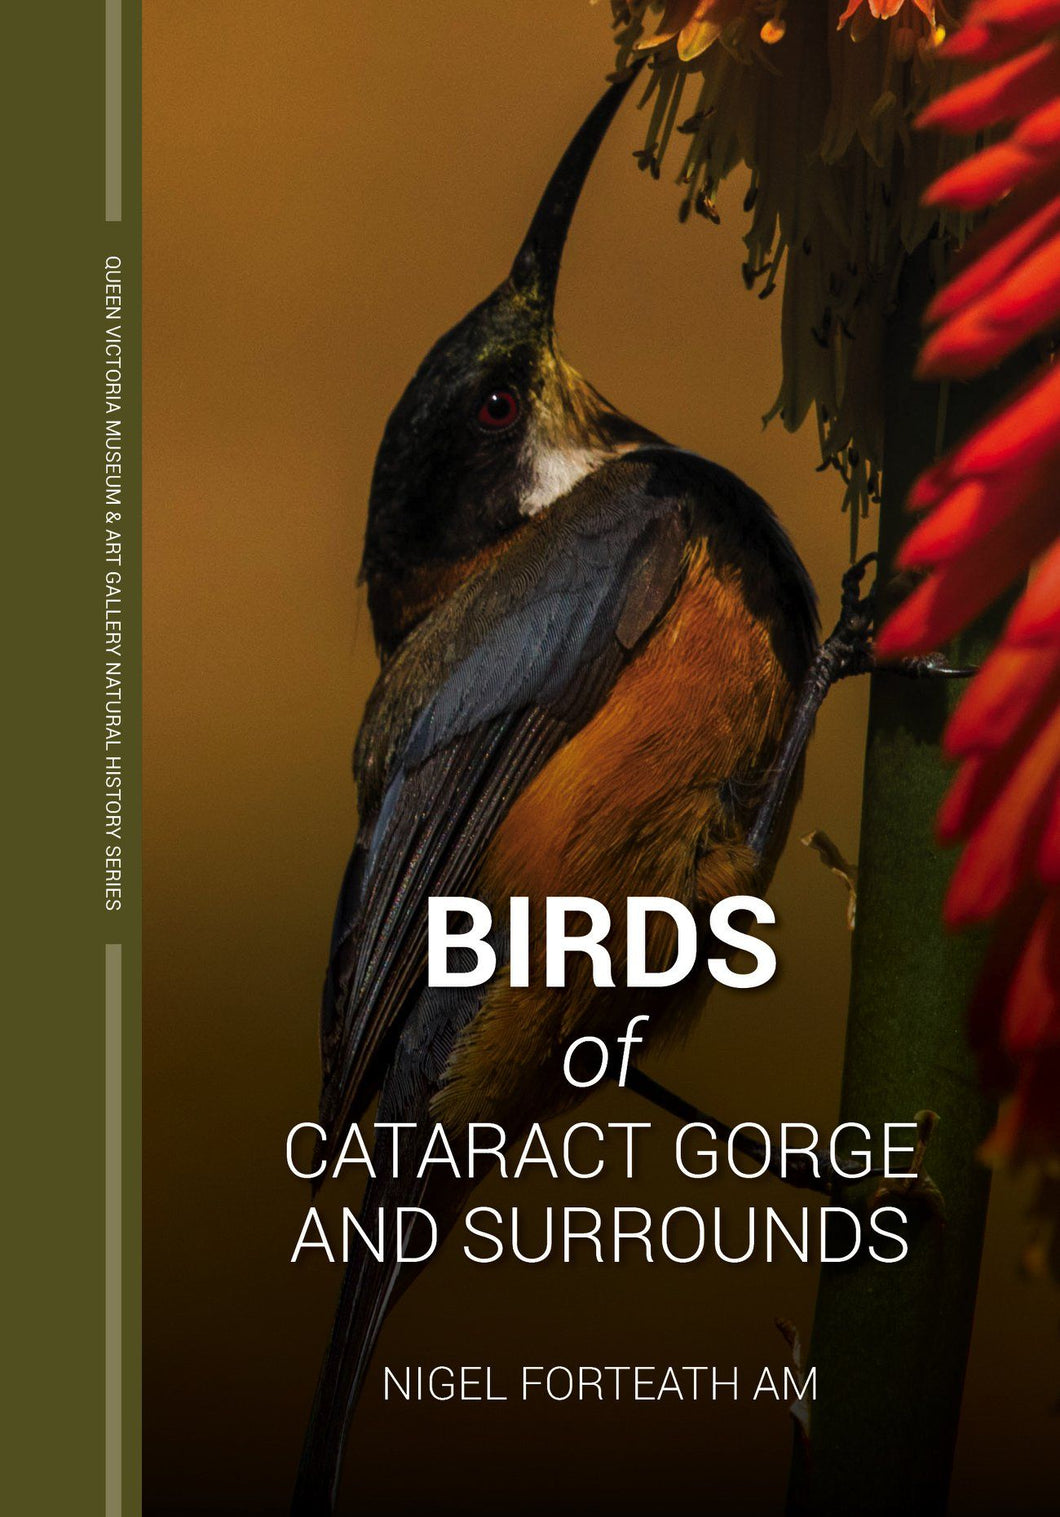 Book of birds from the Gorge, Launceston Tasmania Eastern Spinebill on cover.